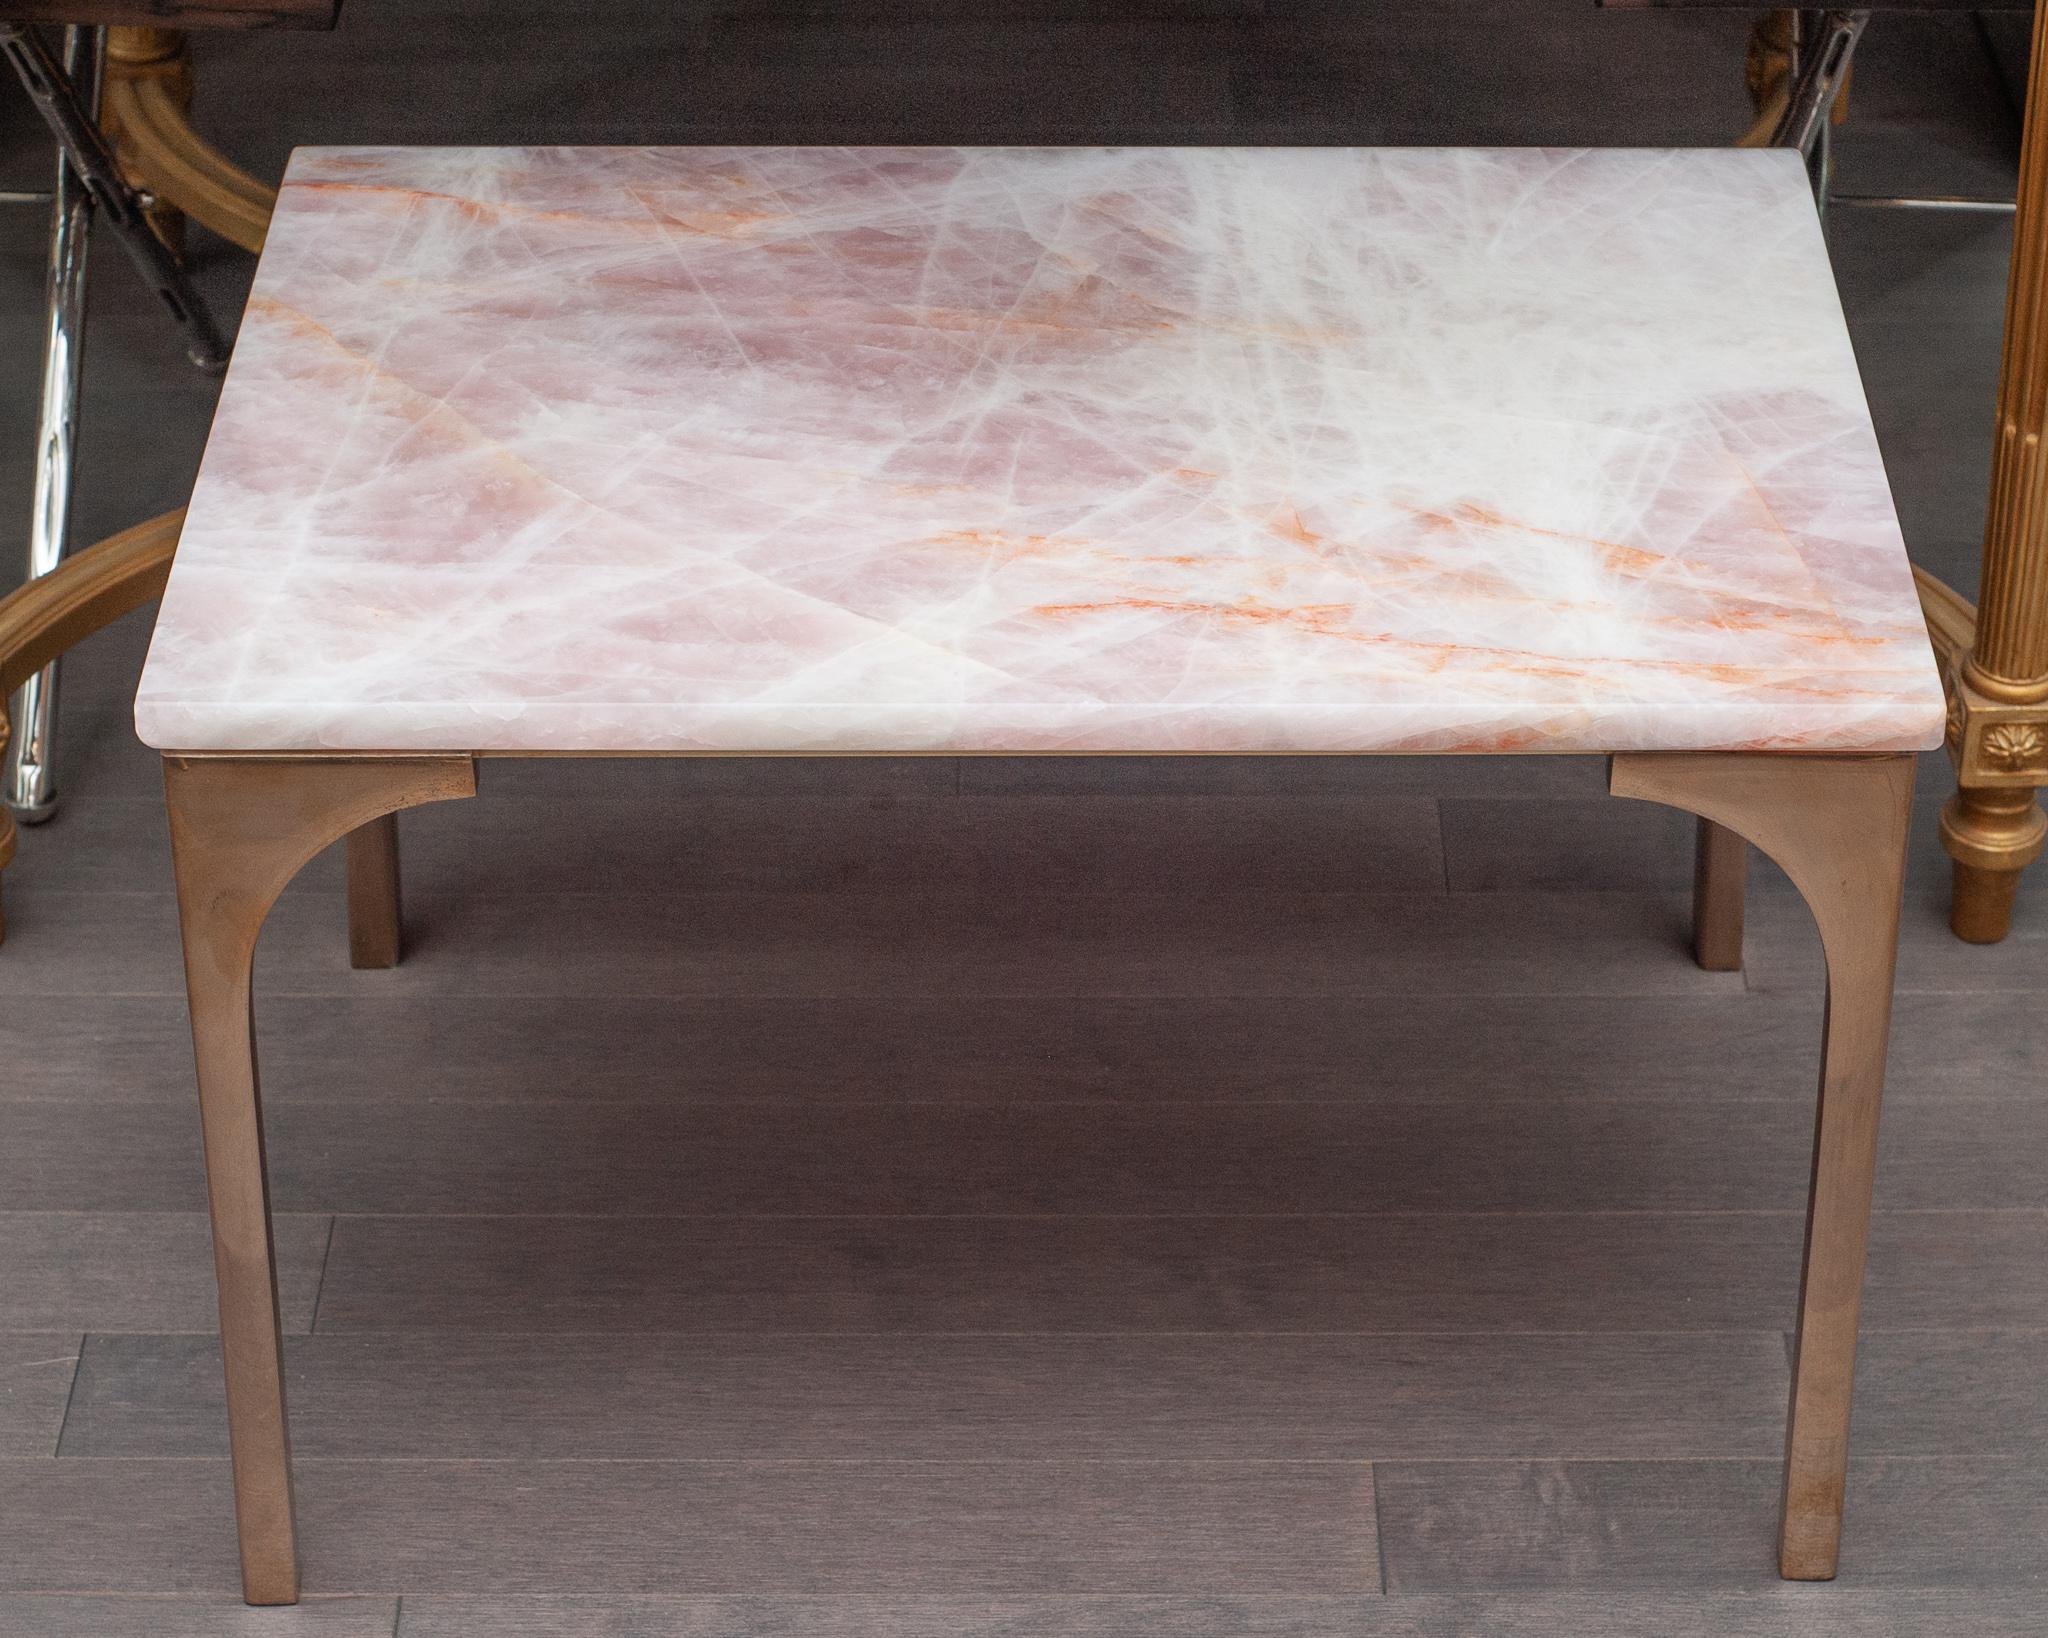 A gorgeous Studio Maison Nurita rose quartz and bronze table. Fabricated from a solid slab of the highest quality rose quartz from Brazil, this table features polished rose gold tone solid poured bronze legs. Rose quartz, the stone of universal